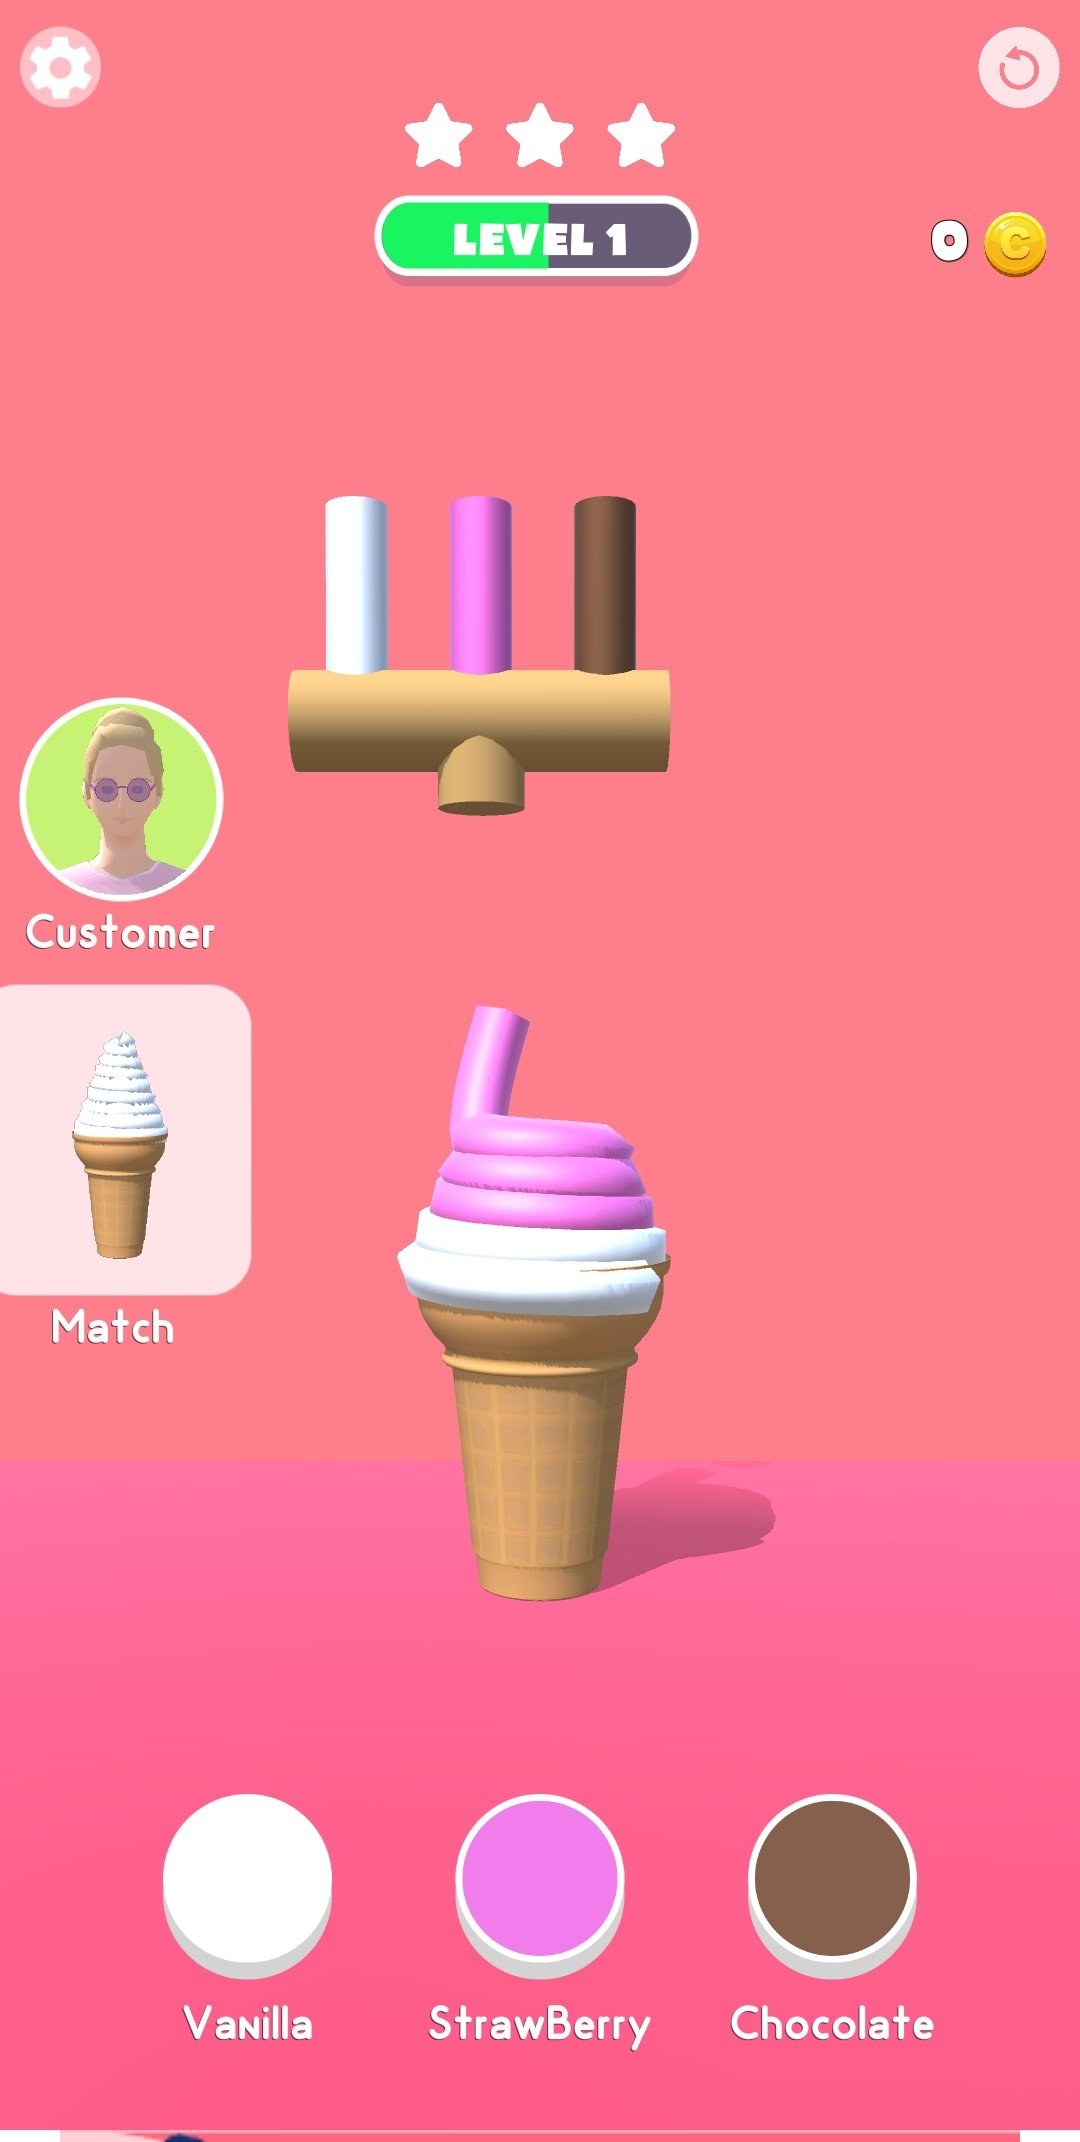 download the new version for apple ice cream and cake games